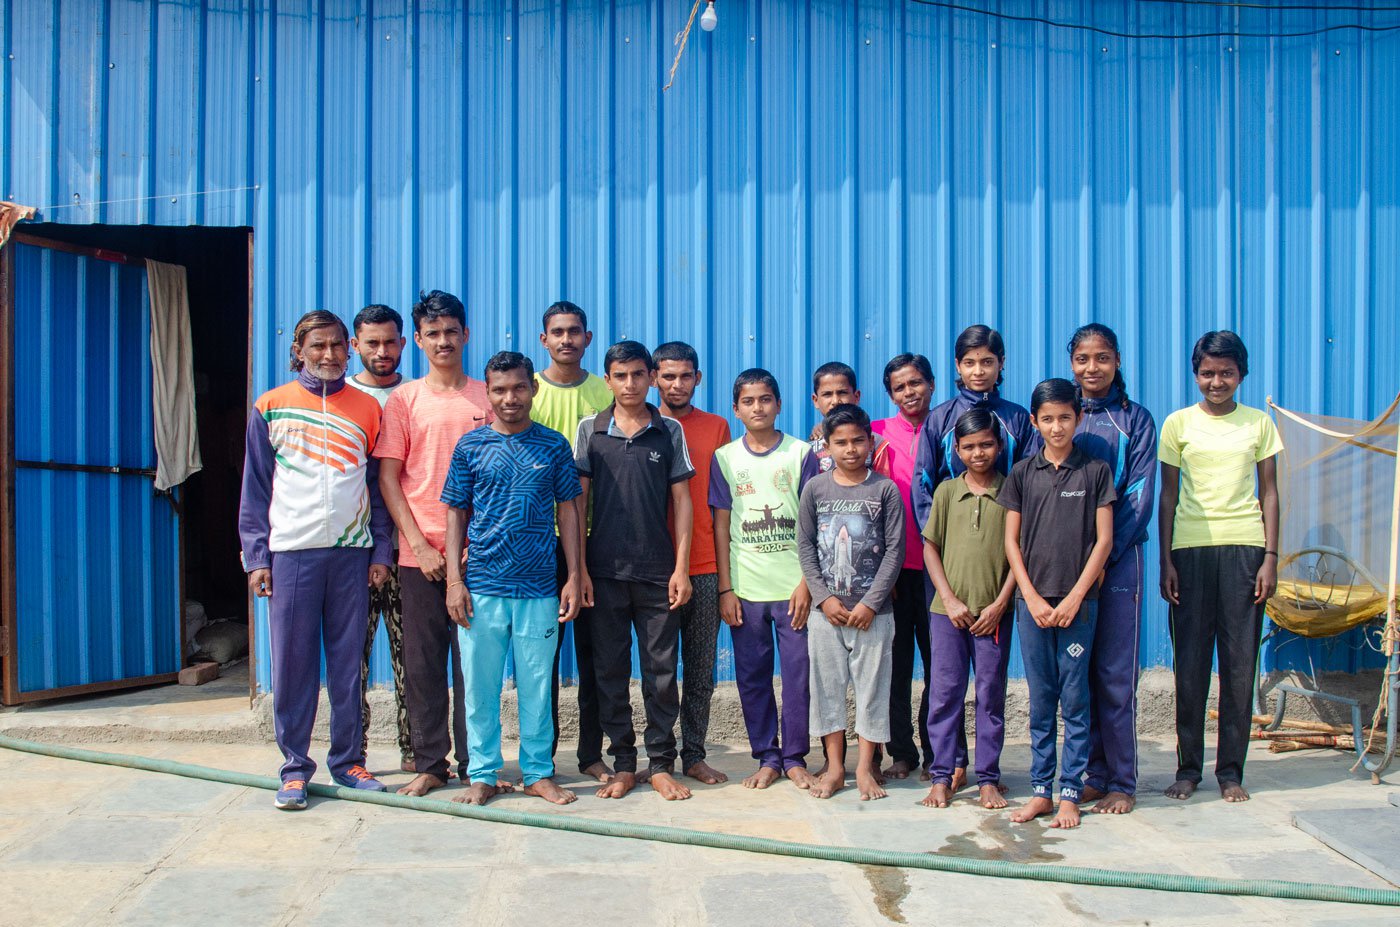 The tin structure of the academy stands in the middle of fields, adjacent to the Beed bypass road. Athletes from marginalised communities reside, study, and train here